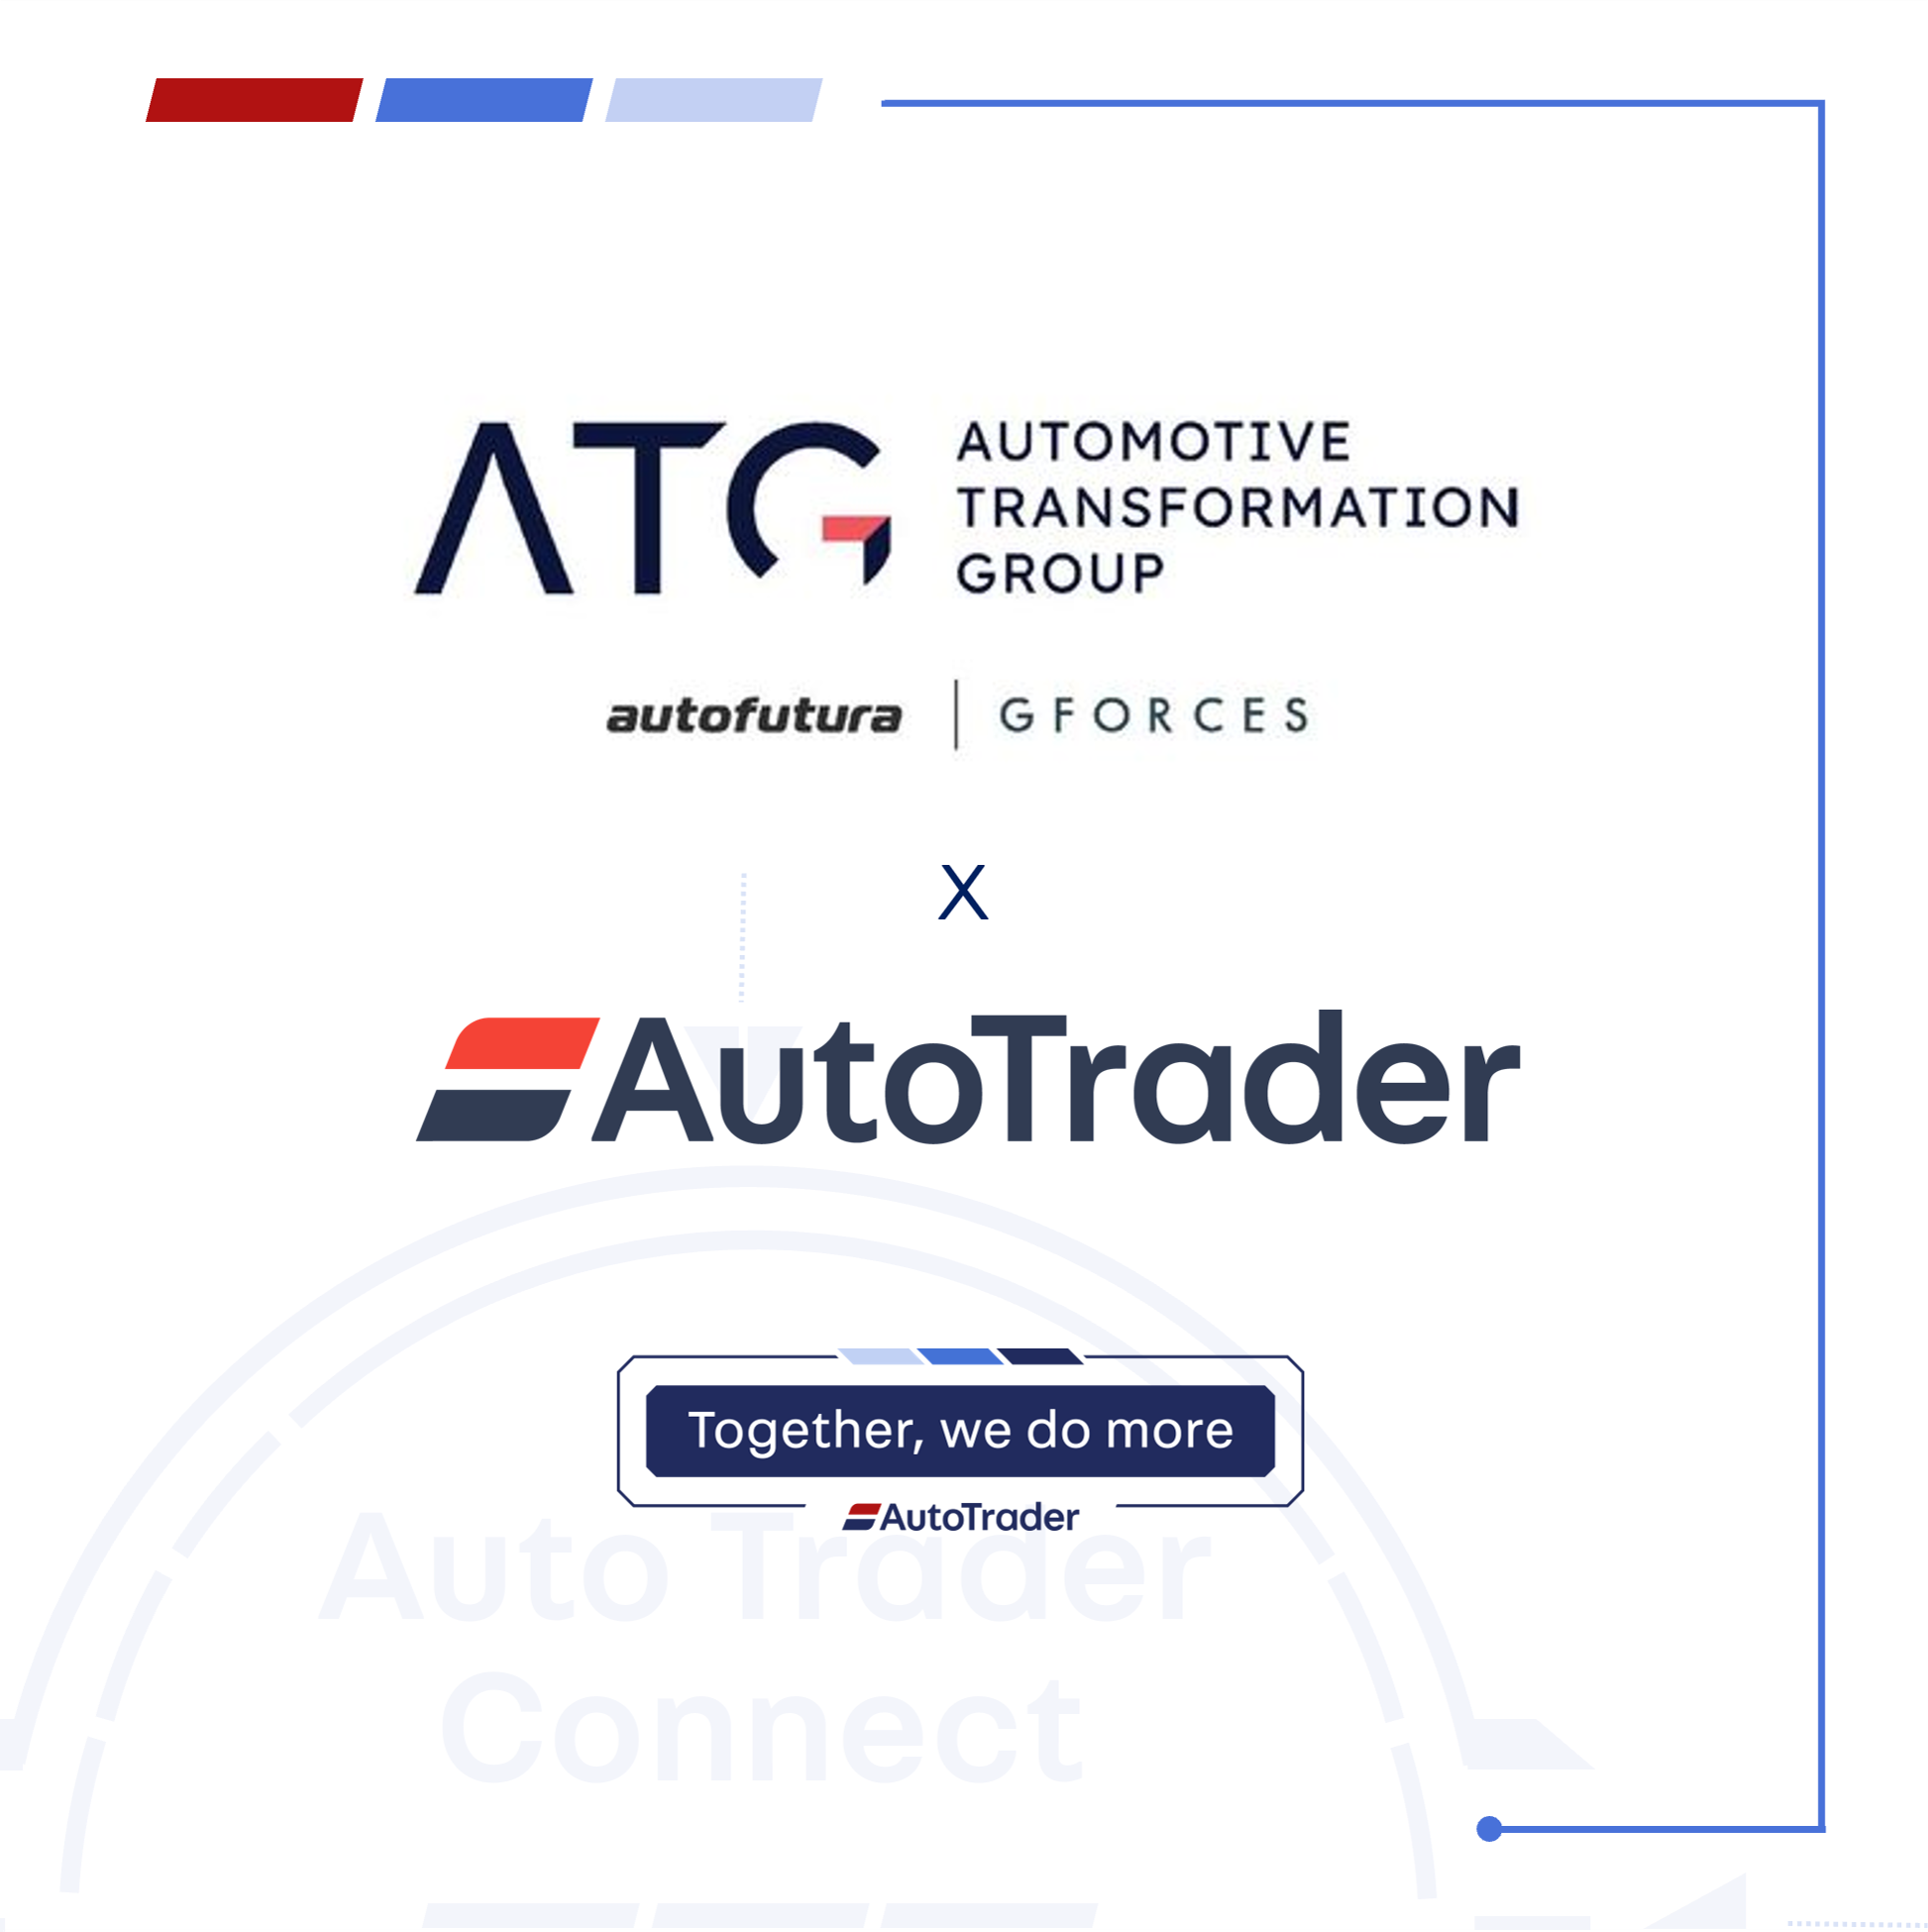 Auto Trader partners with Automotive Transformation Group to bring real-time data benefits to retailers